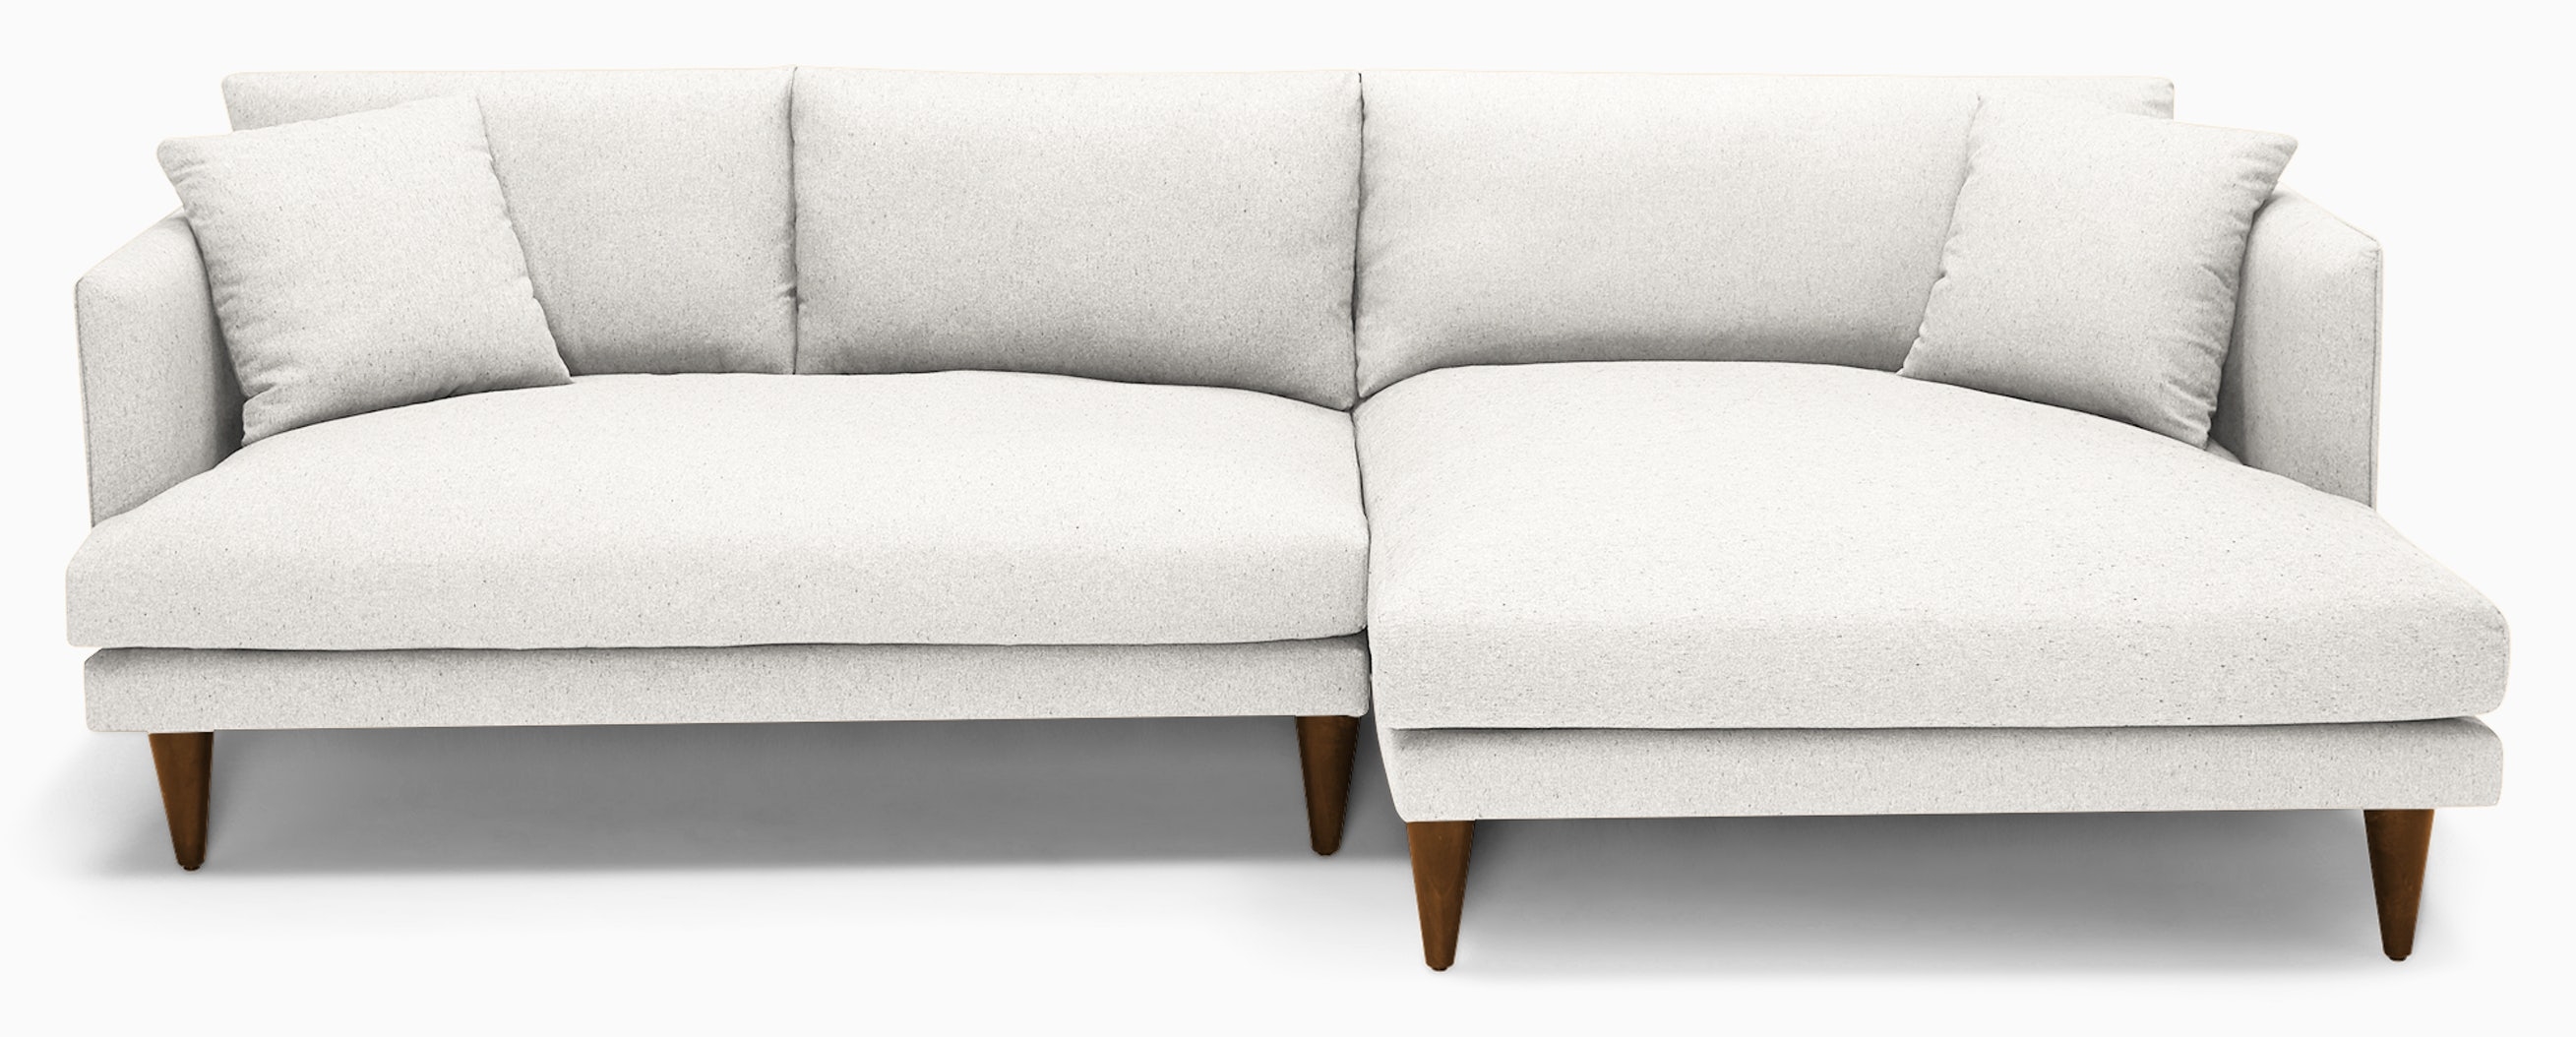 White Lewis Mid Century Modern Sectional - Tussah Snow -Right - Mocha Wood StainCone Legs - Image 0